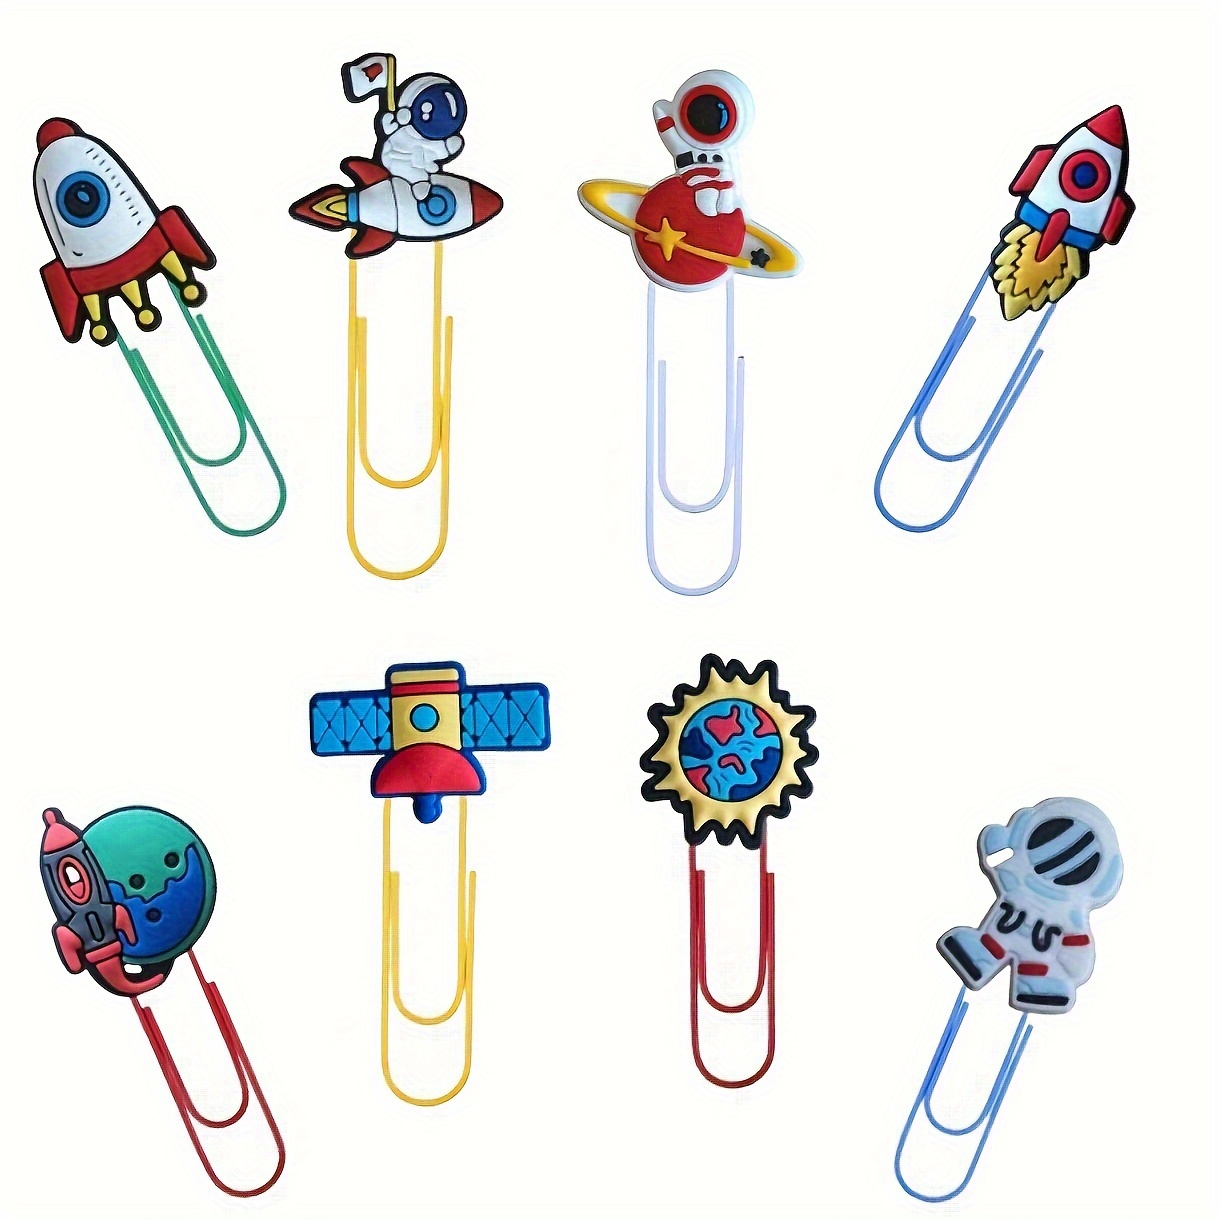 

8 Pcs Cartoon Space-themed Paper Clips - Cute Colorful Office Supplies, Desk Accessories, Bookmark Pliers, School Books File Page Markers, Welcome Gift